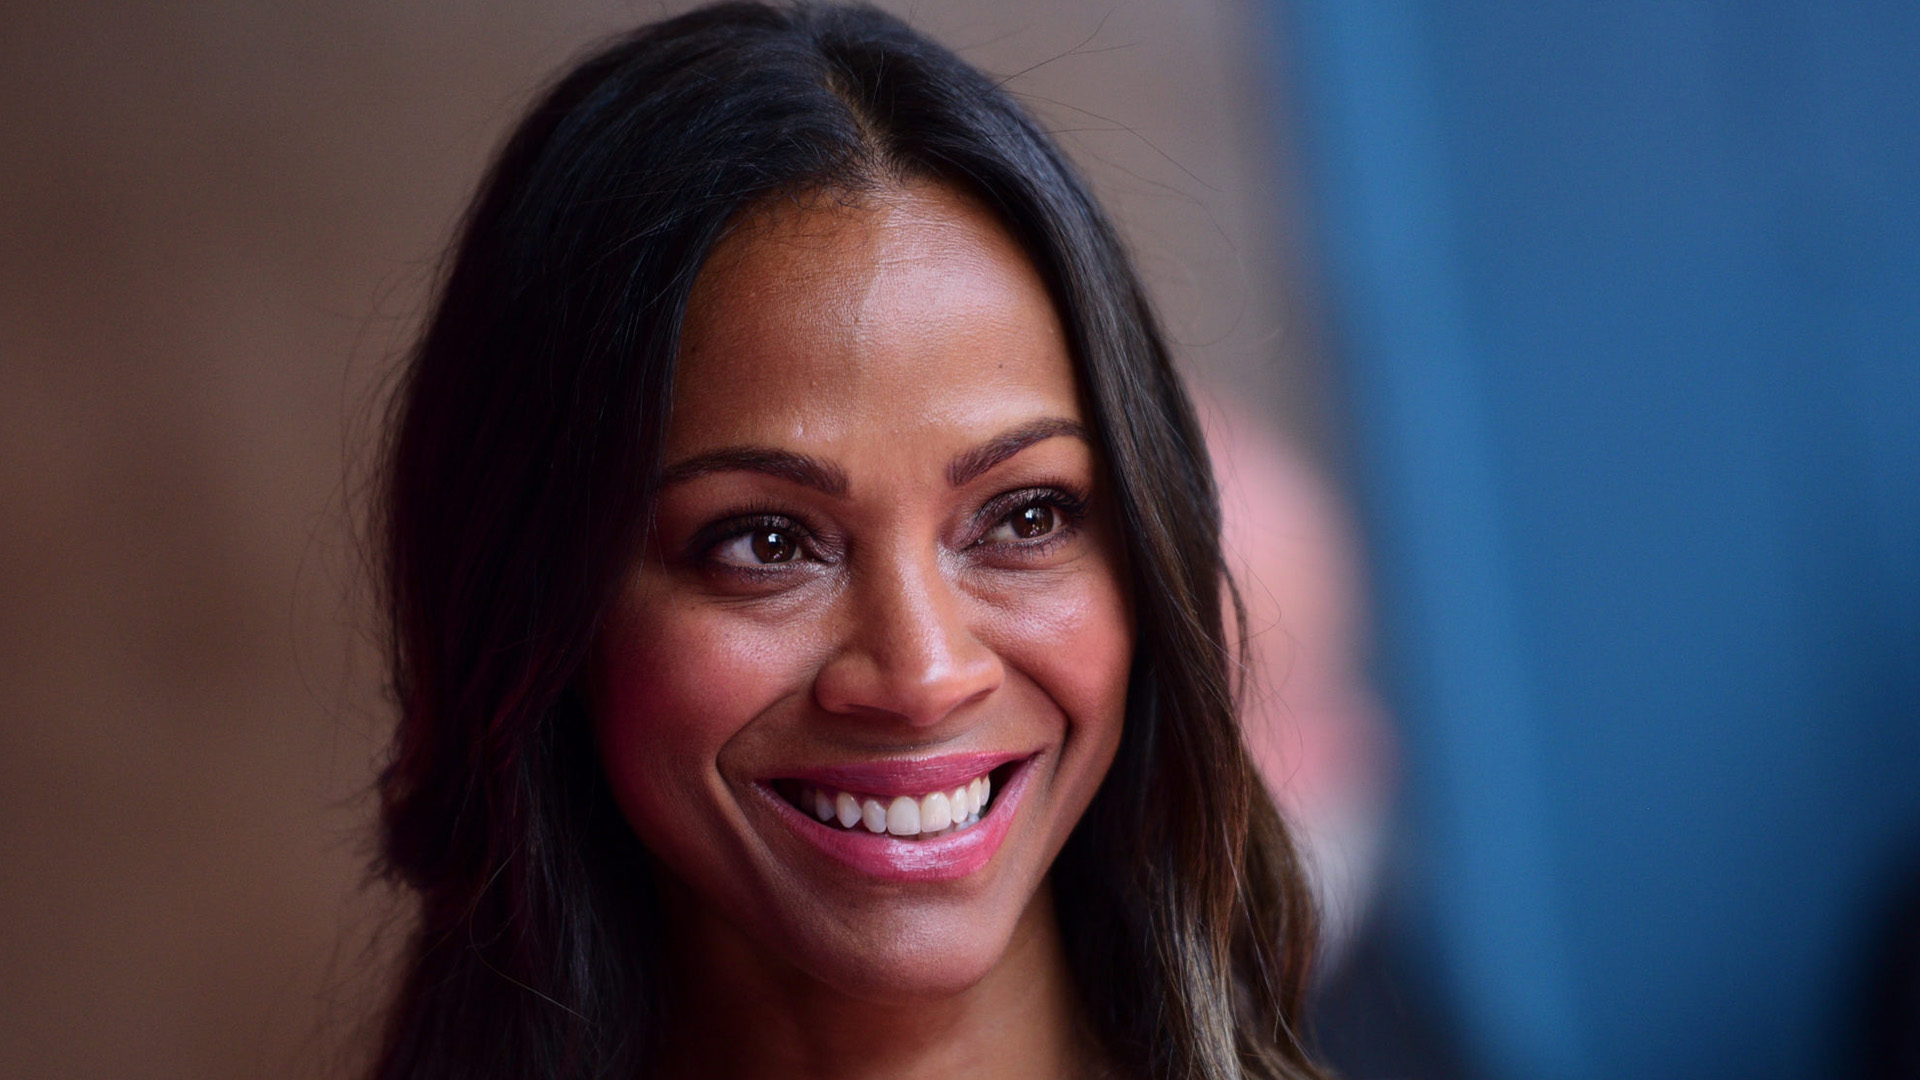 Did You Know Three Of The Highest-Grossing Movies Of All Time Contributed To Zoe Saldana's $35M Fortune?